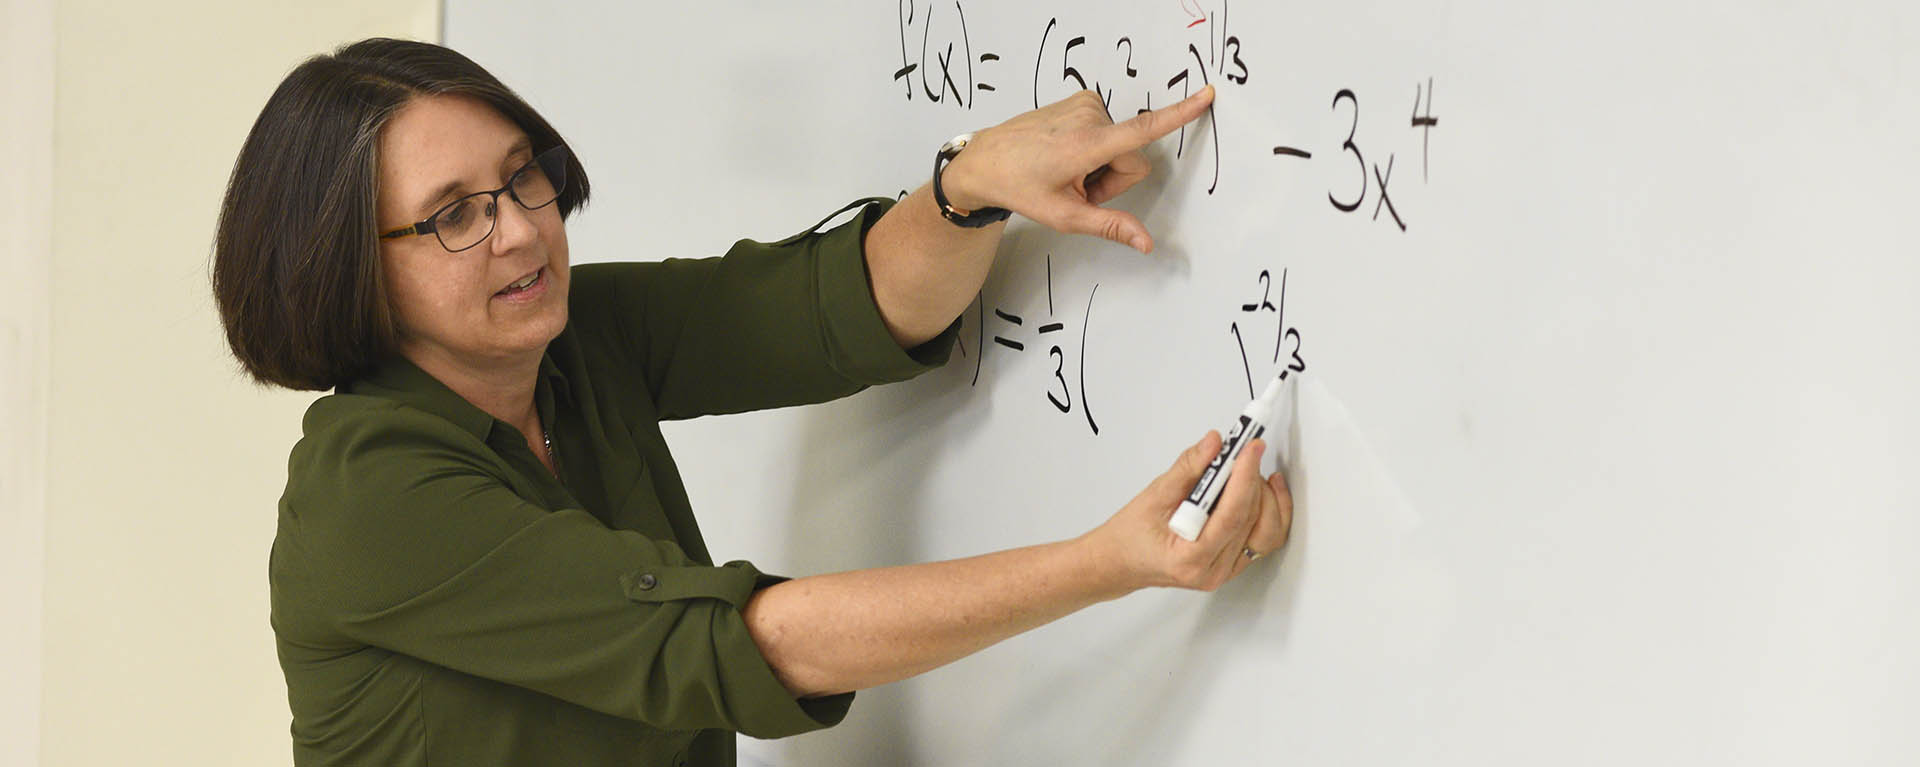 A math professor explains a problem while solving it on a whiteboard.